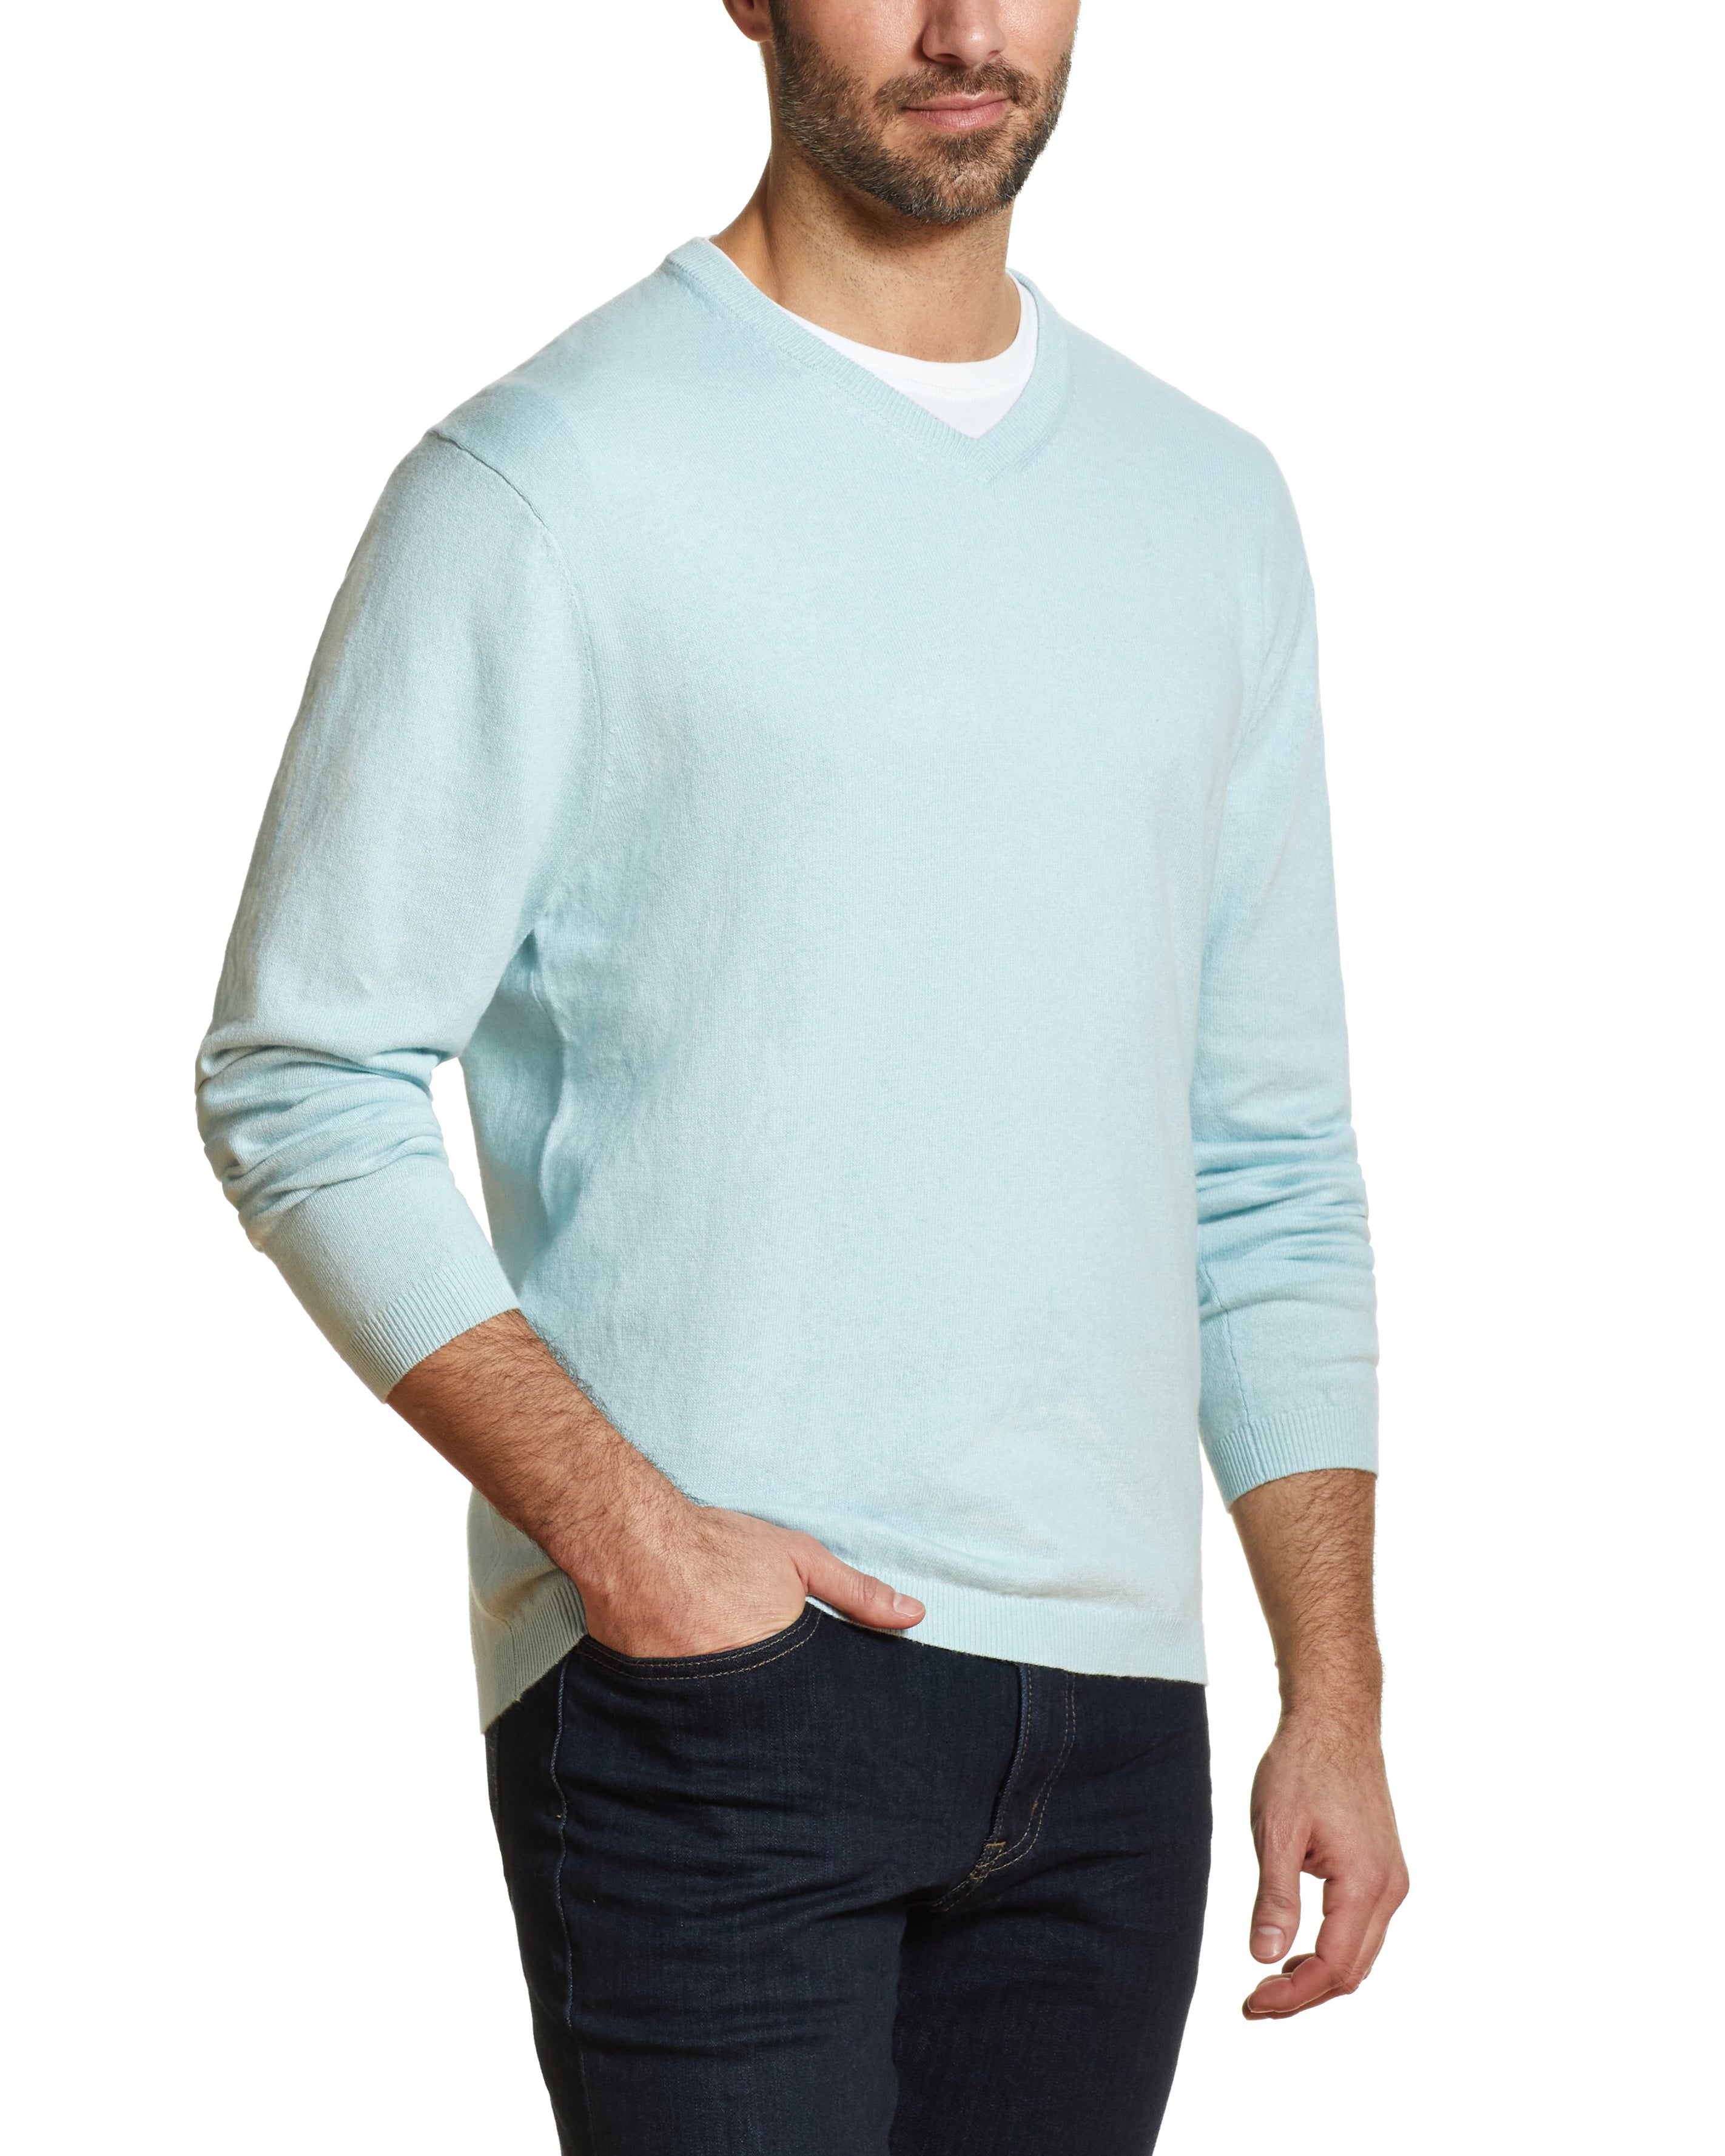 Cotton Cashmere V Neck Sweater in Spring Sky